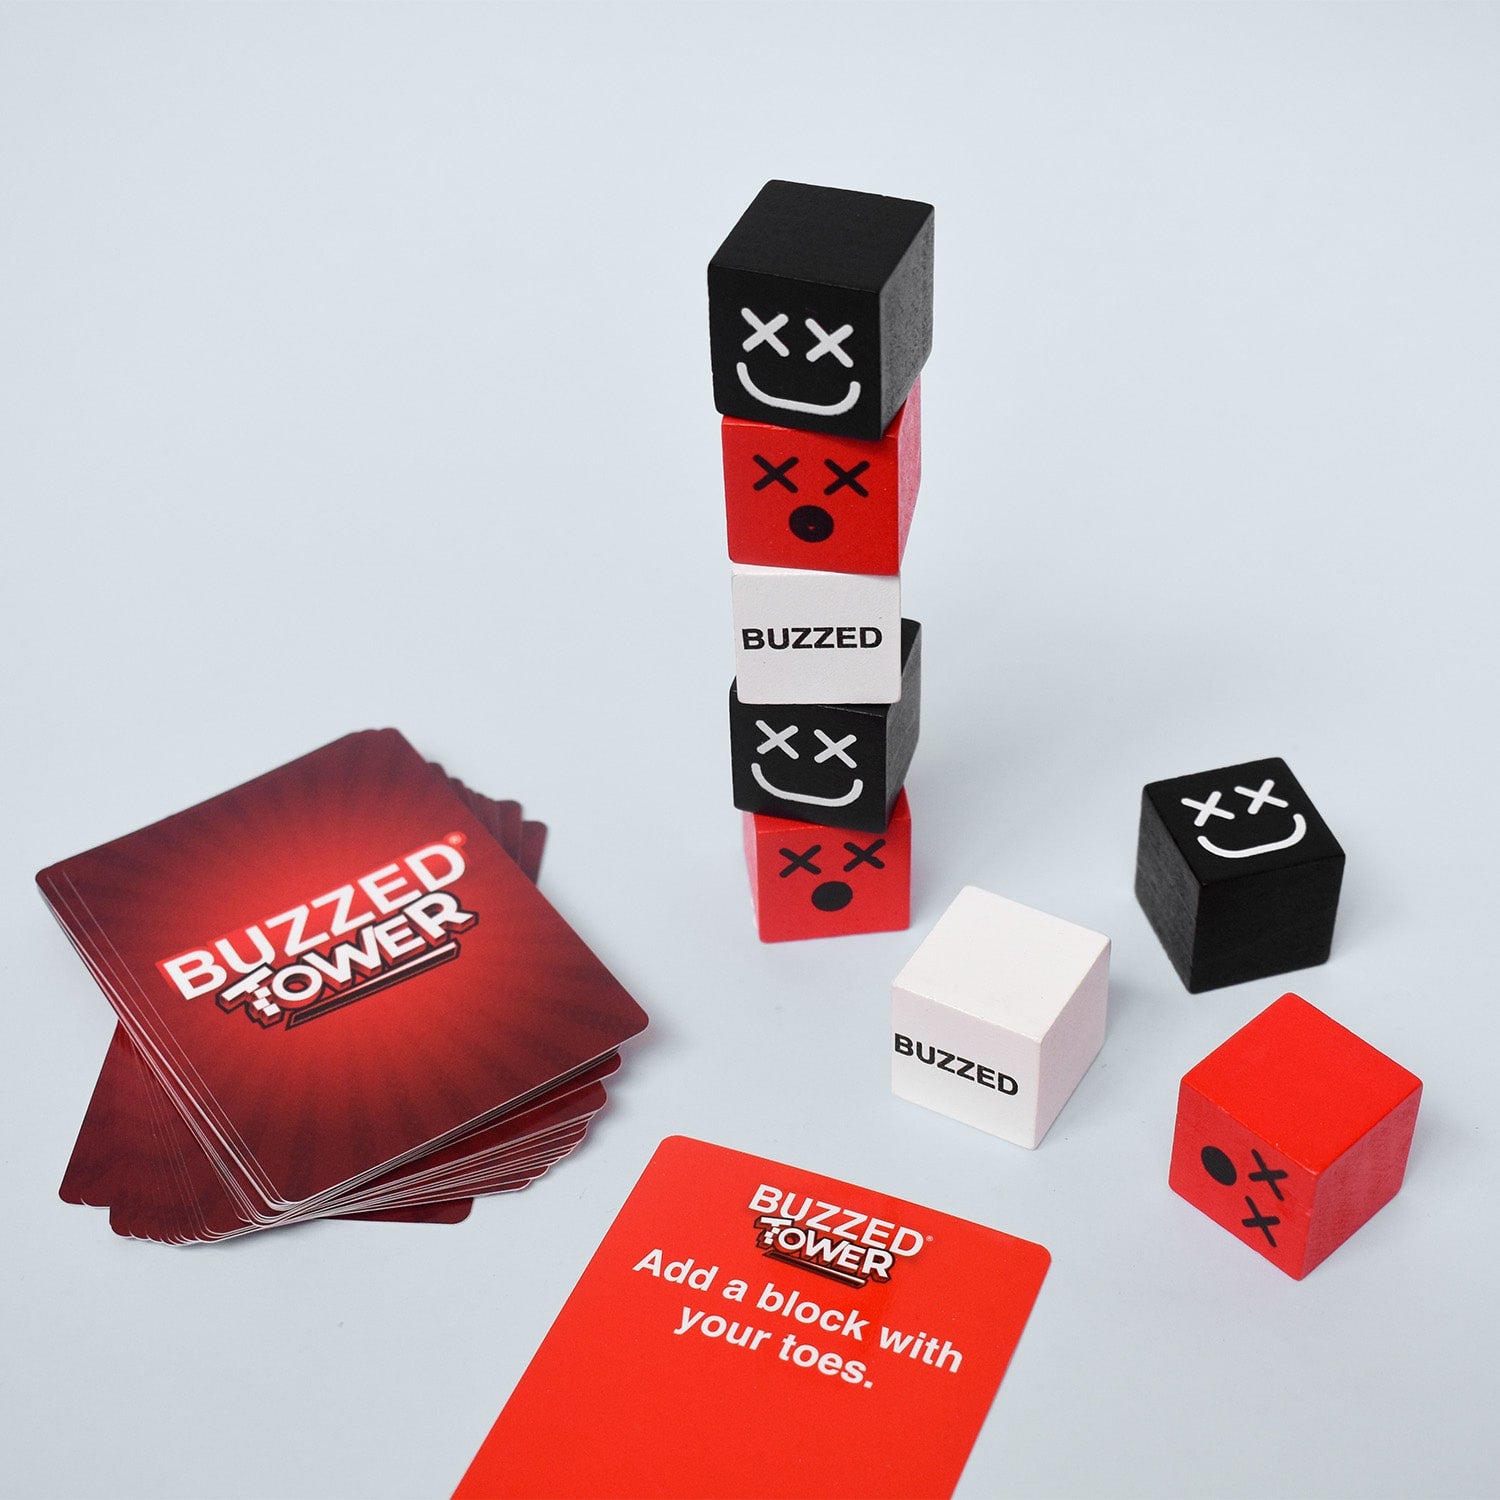 buzzed-tower-game-box-and-game-play-04-what-do-you-meme-by-relatable